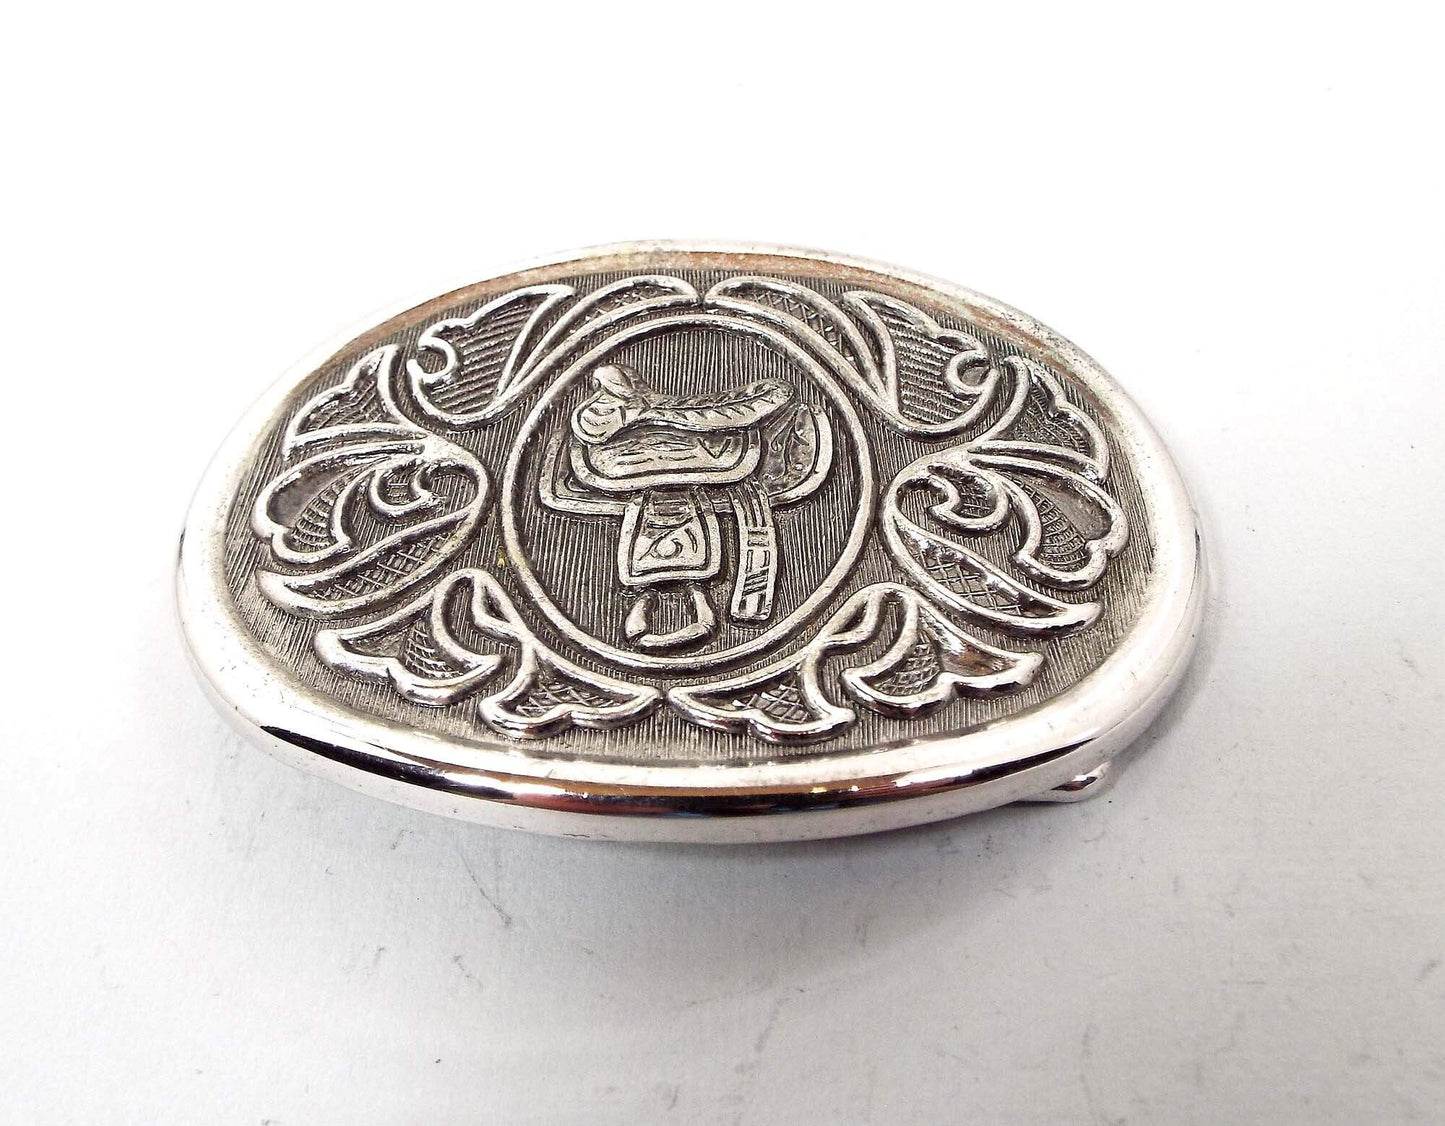 Gray and Silver Tone Avon Vintage Saddle Belt Buckle